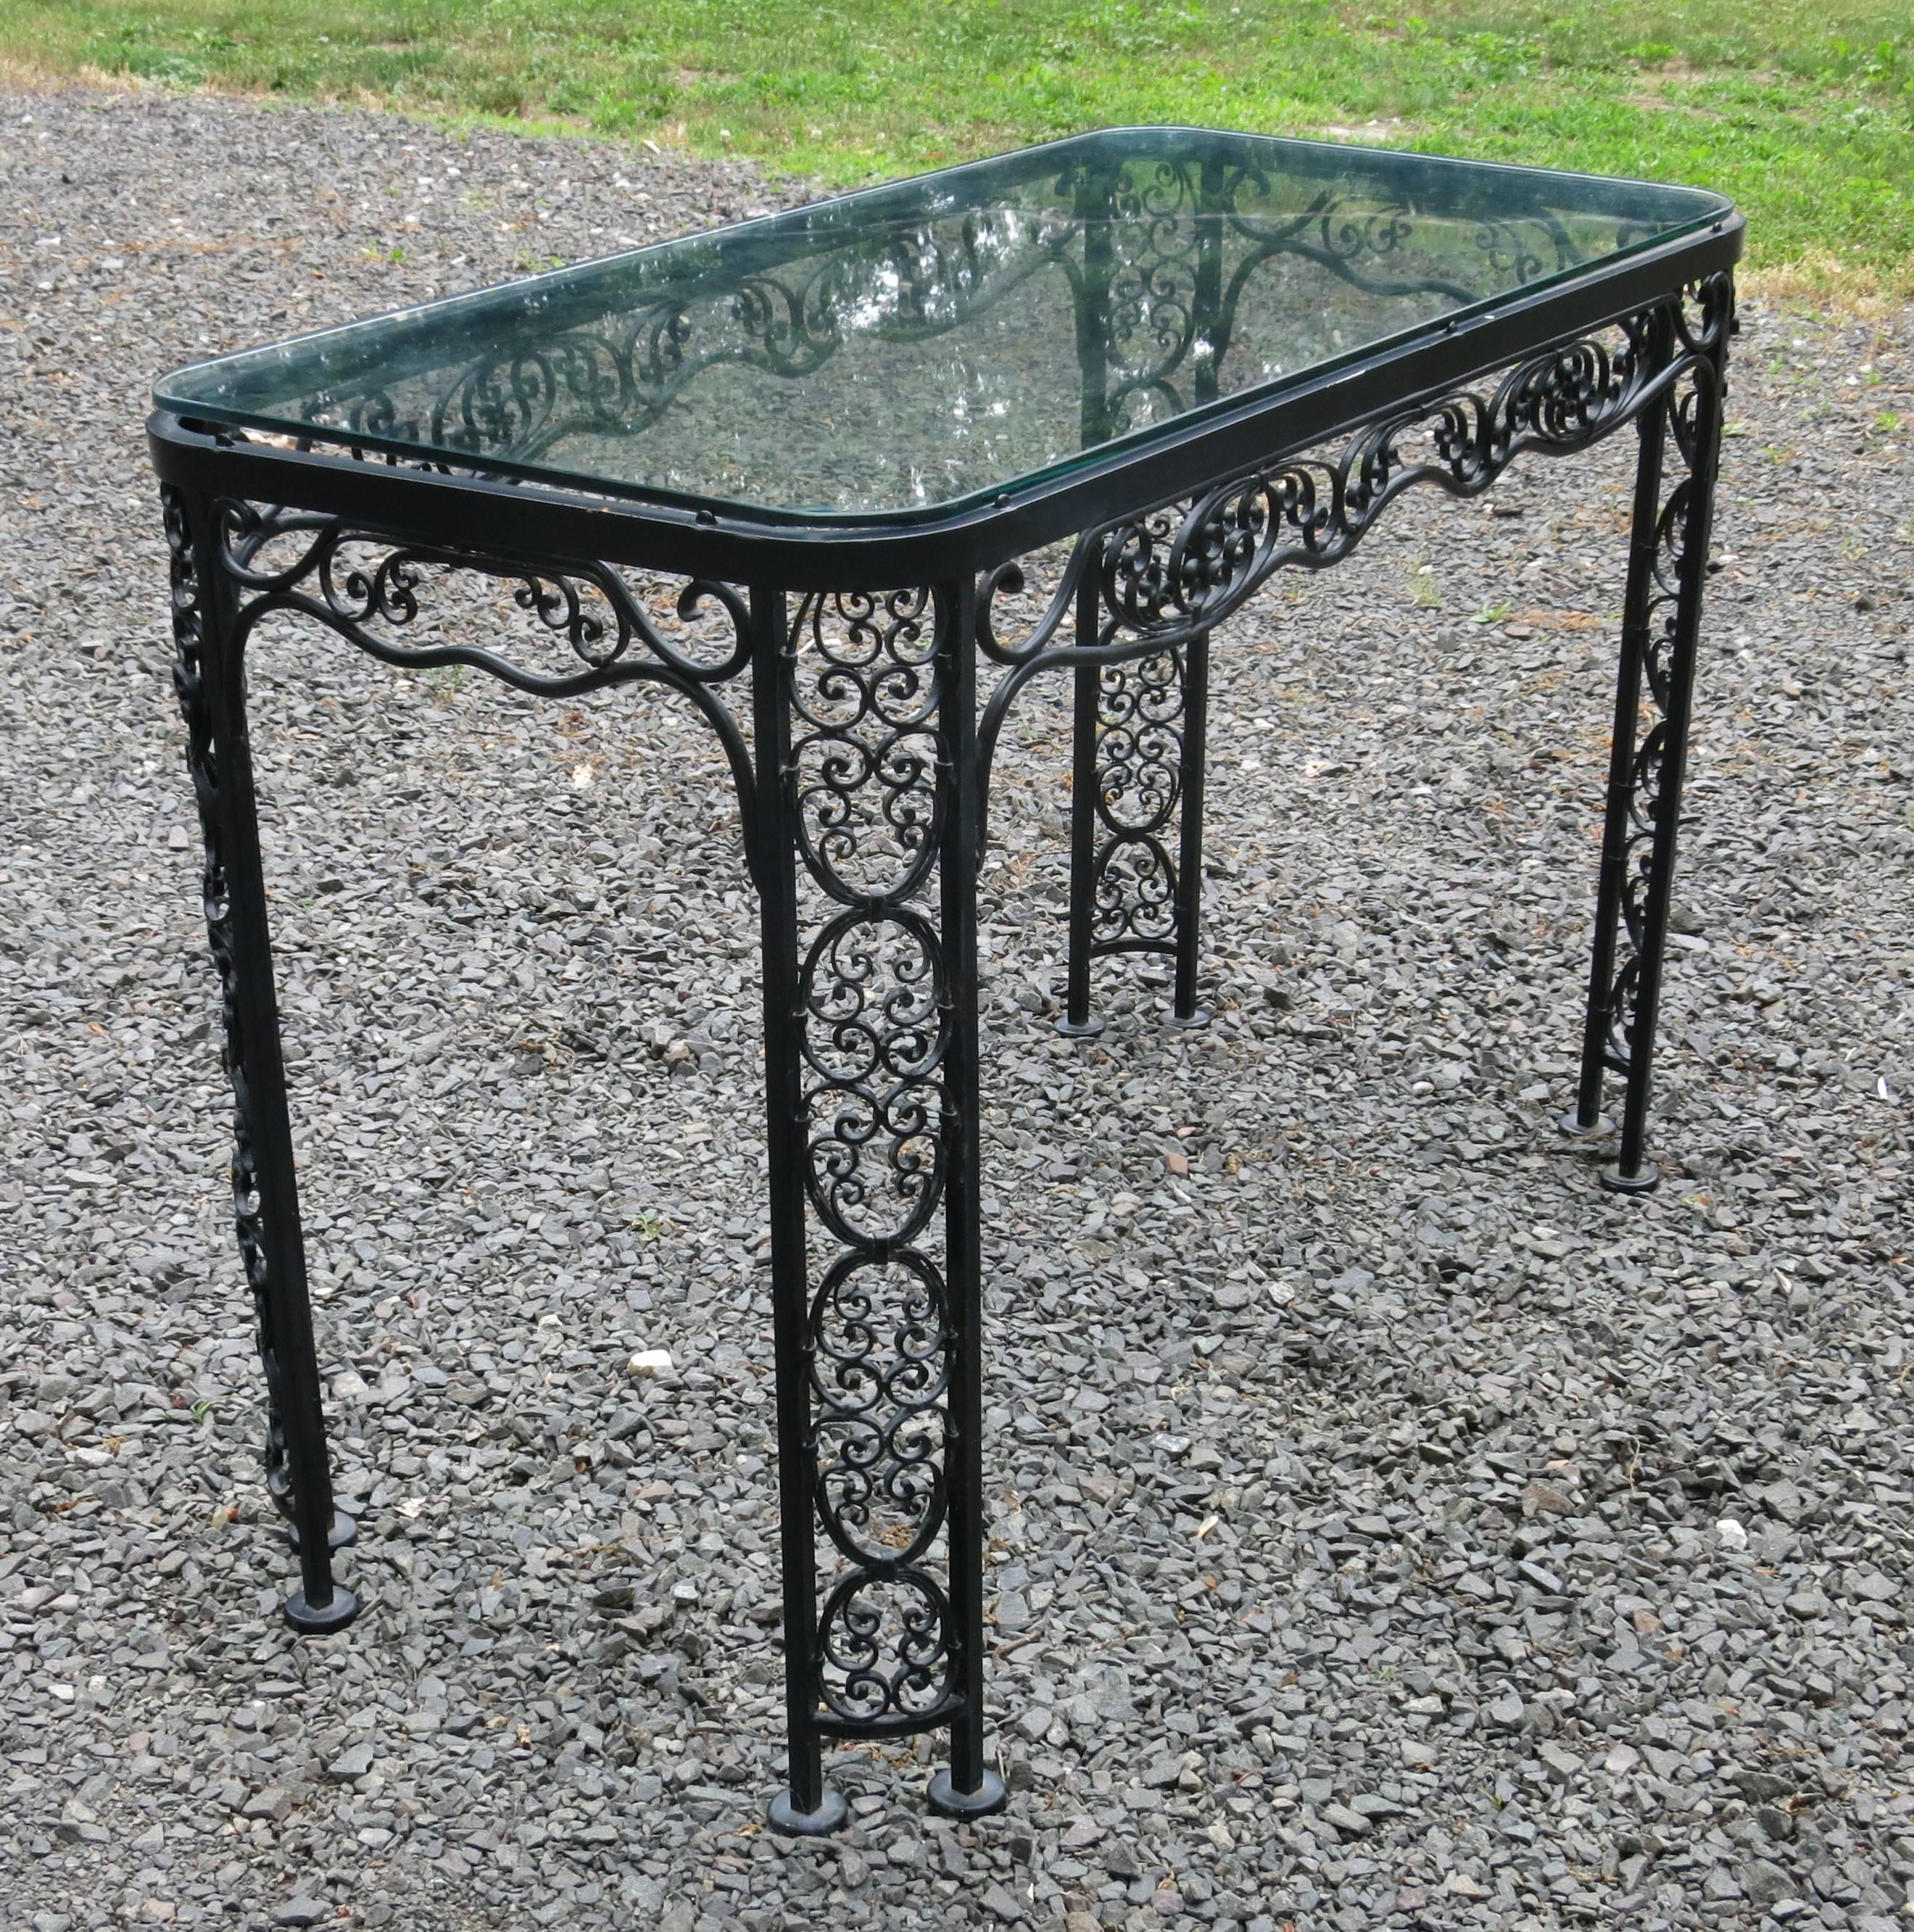 Woodard Andalusian pattern patio table. Table has a few chips to the paint, and glass has a few scratches and a chip to one corner. Complimentary piece to the white dining set that is listed. Rare to find. It is 20.5